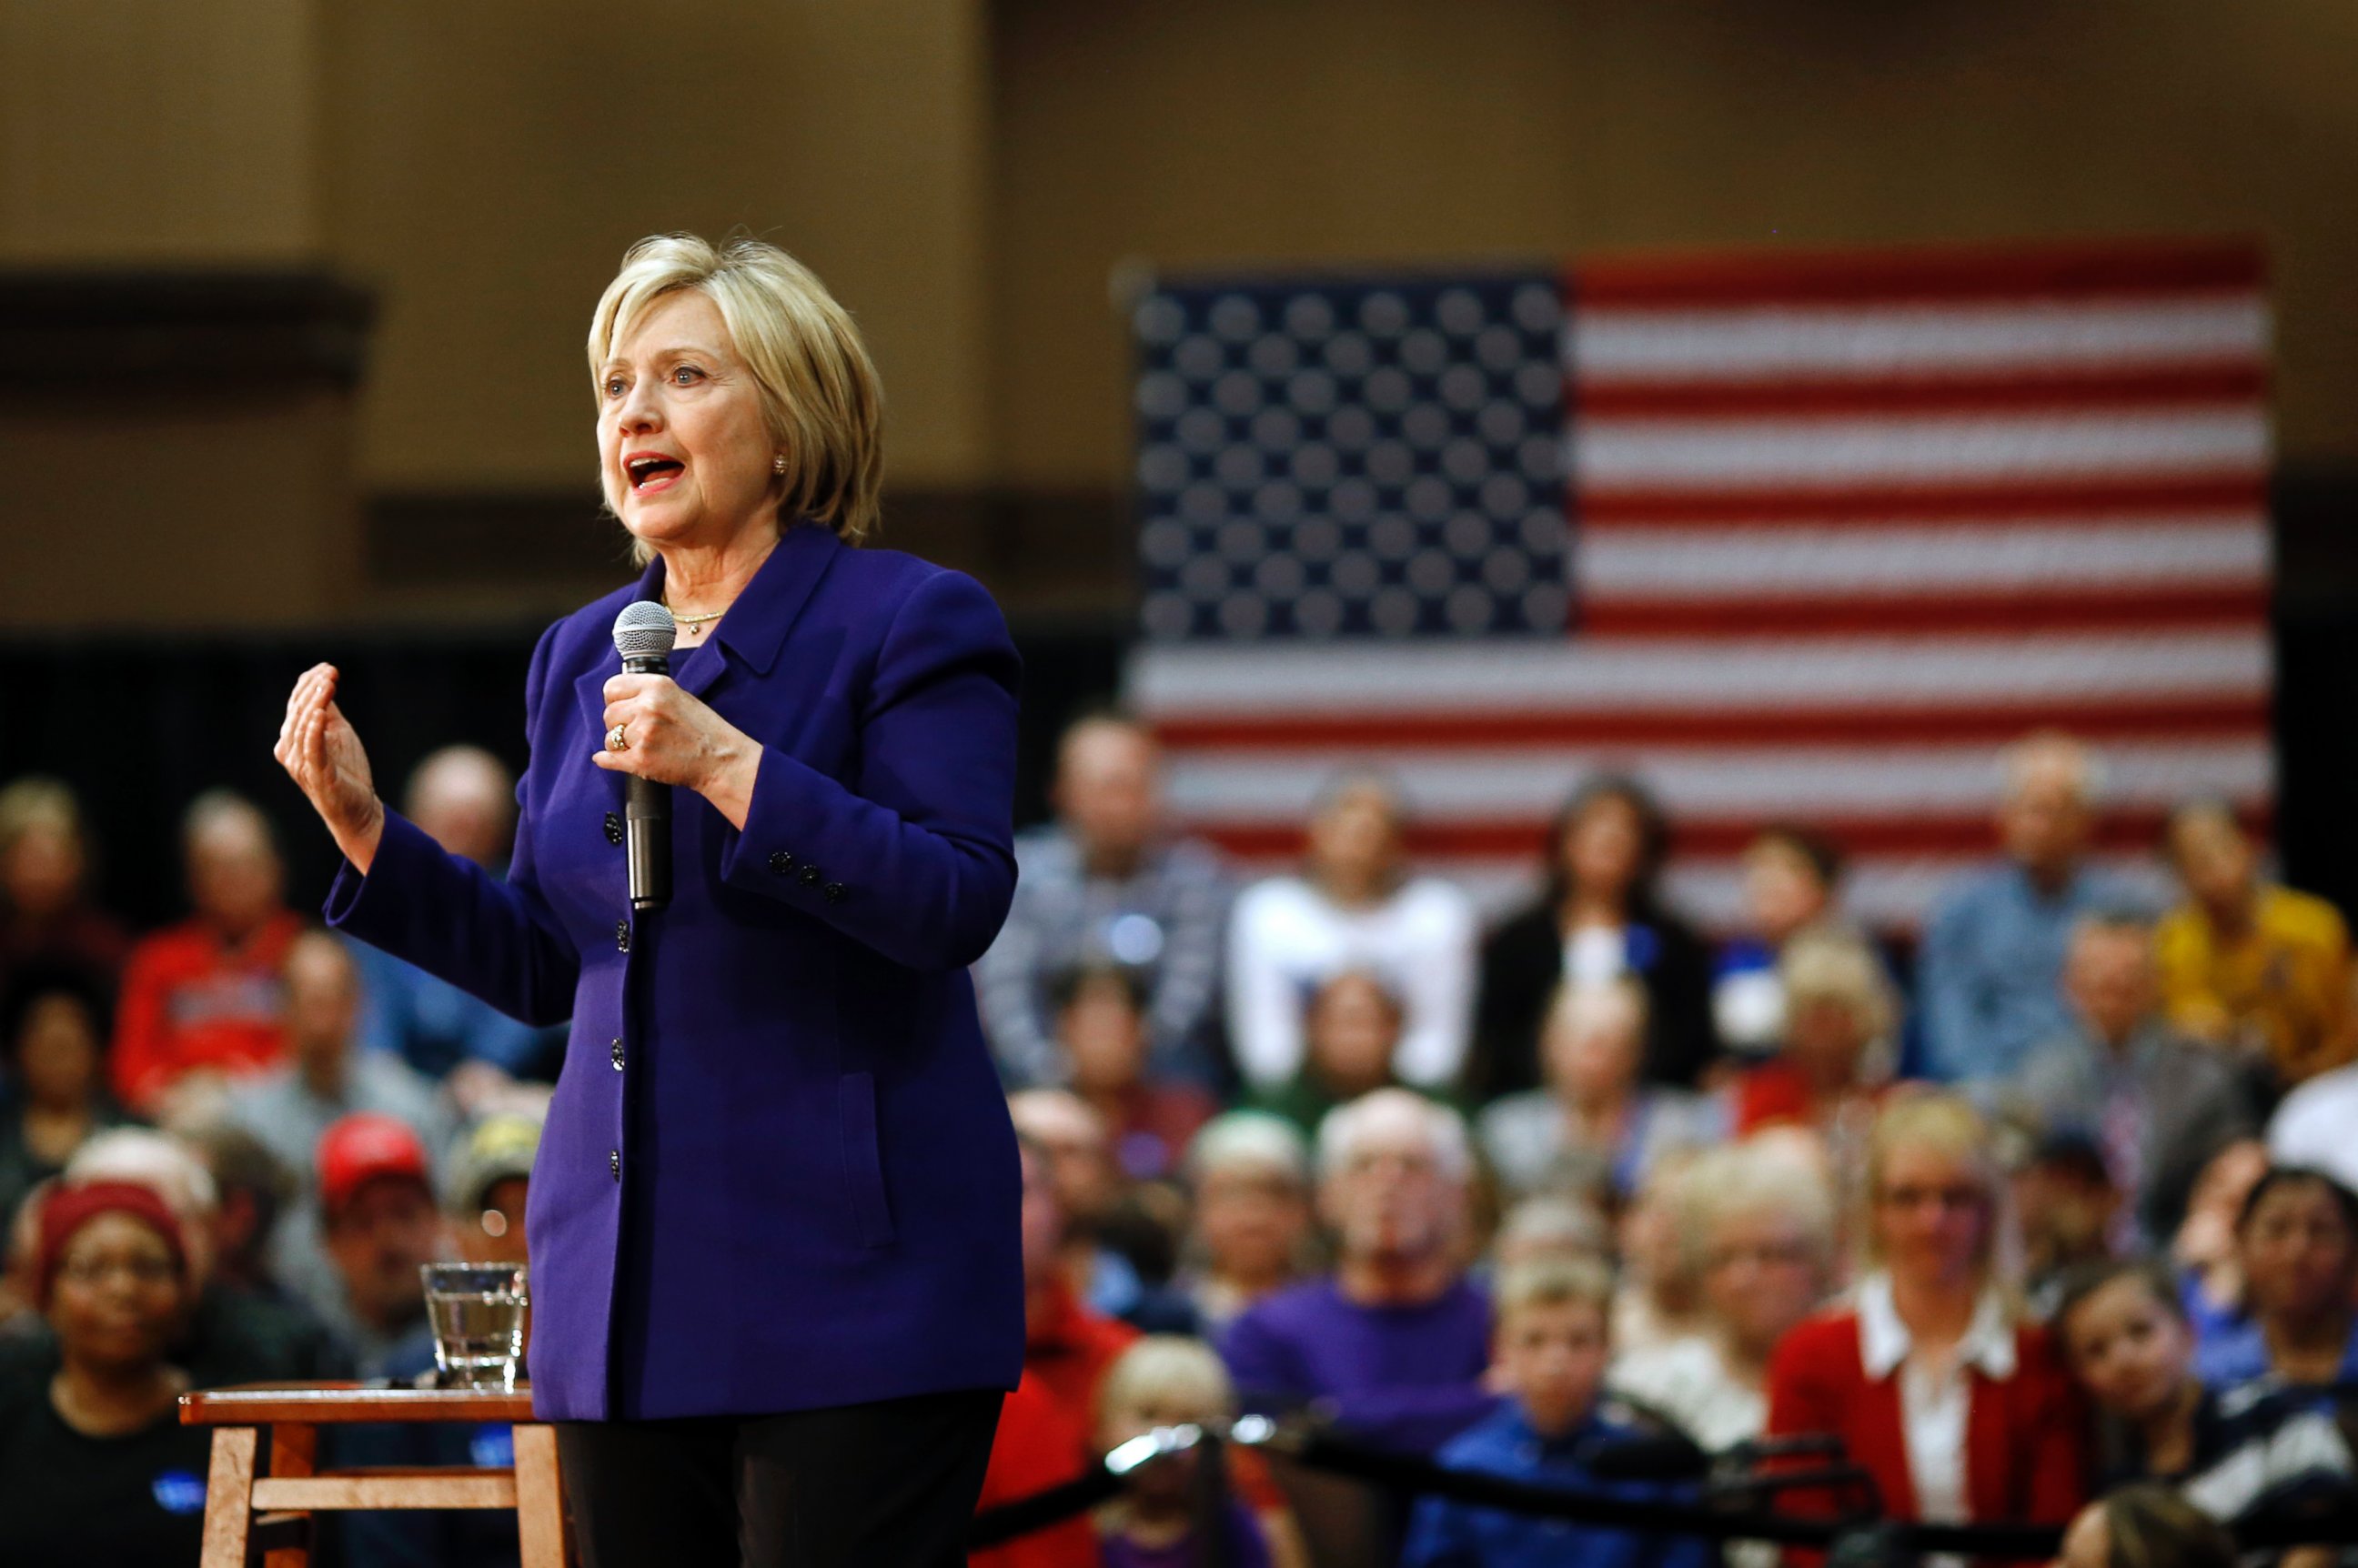 PHOTO: Democratic presidential candidate Hillary Clinton speaks during a campaign event in Burlington, Iowa, Jan. 20, 2016.